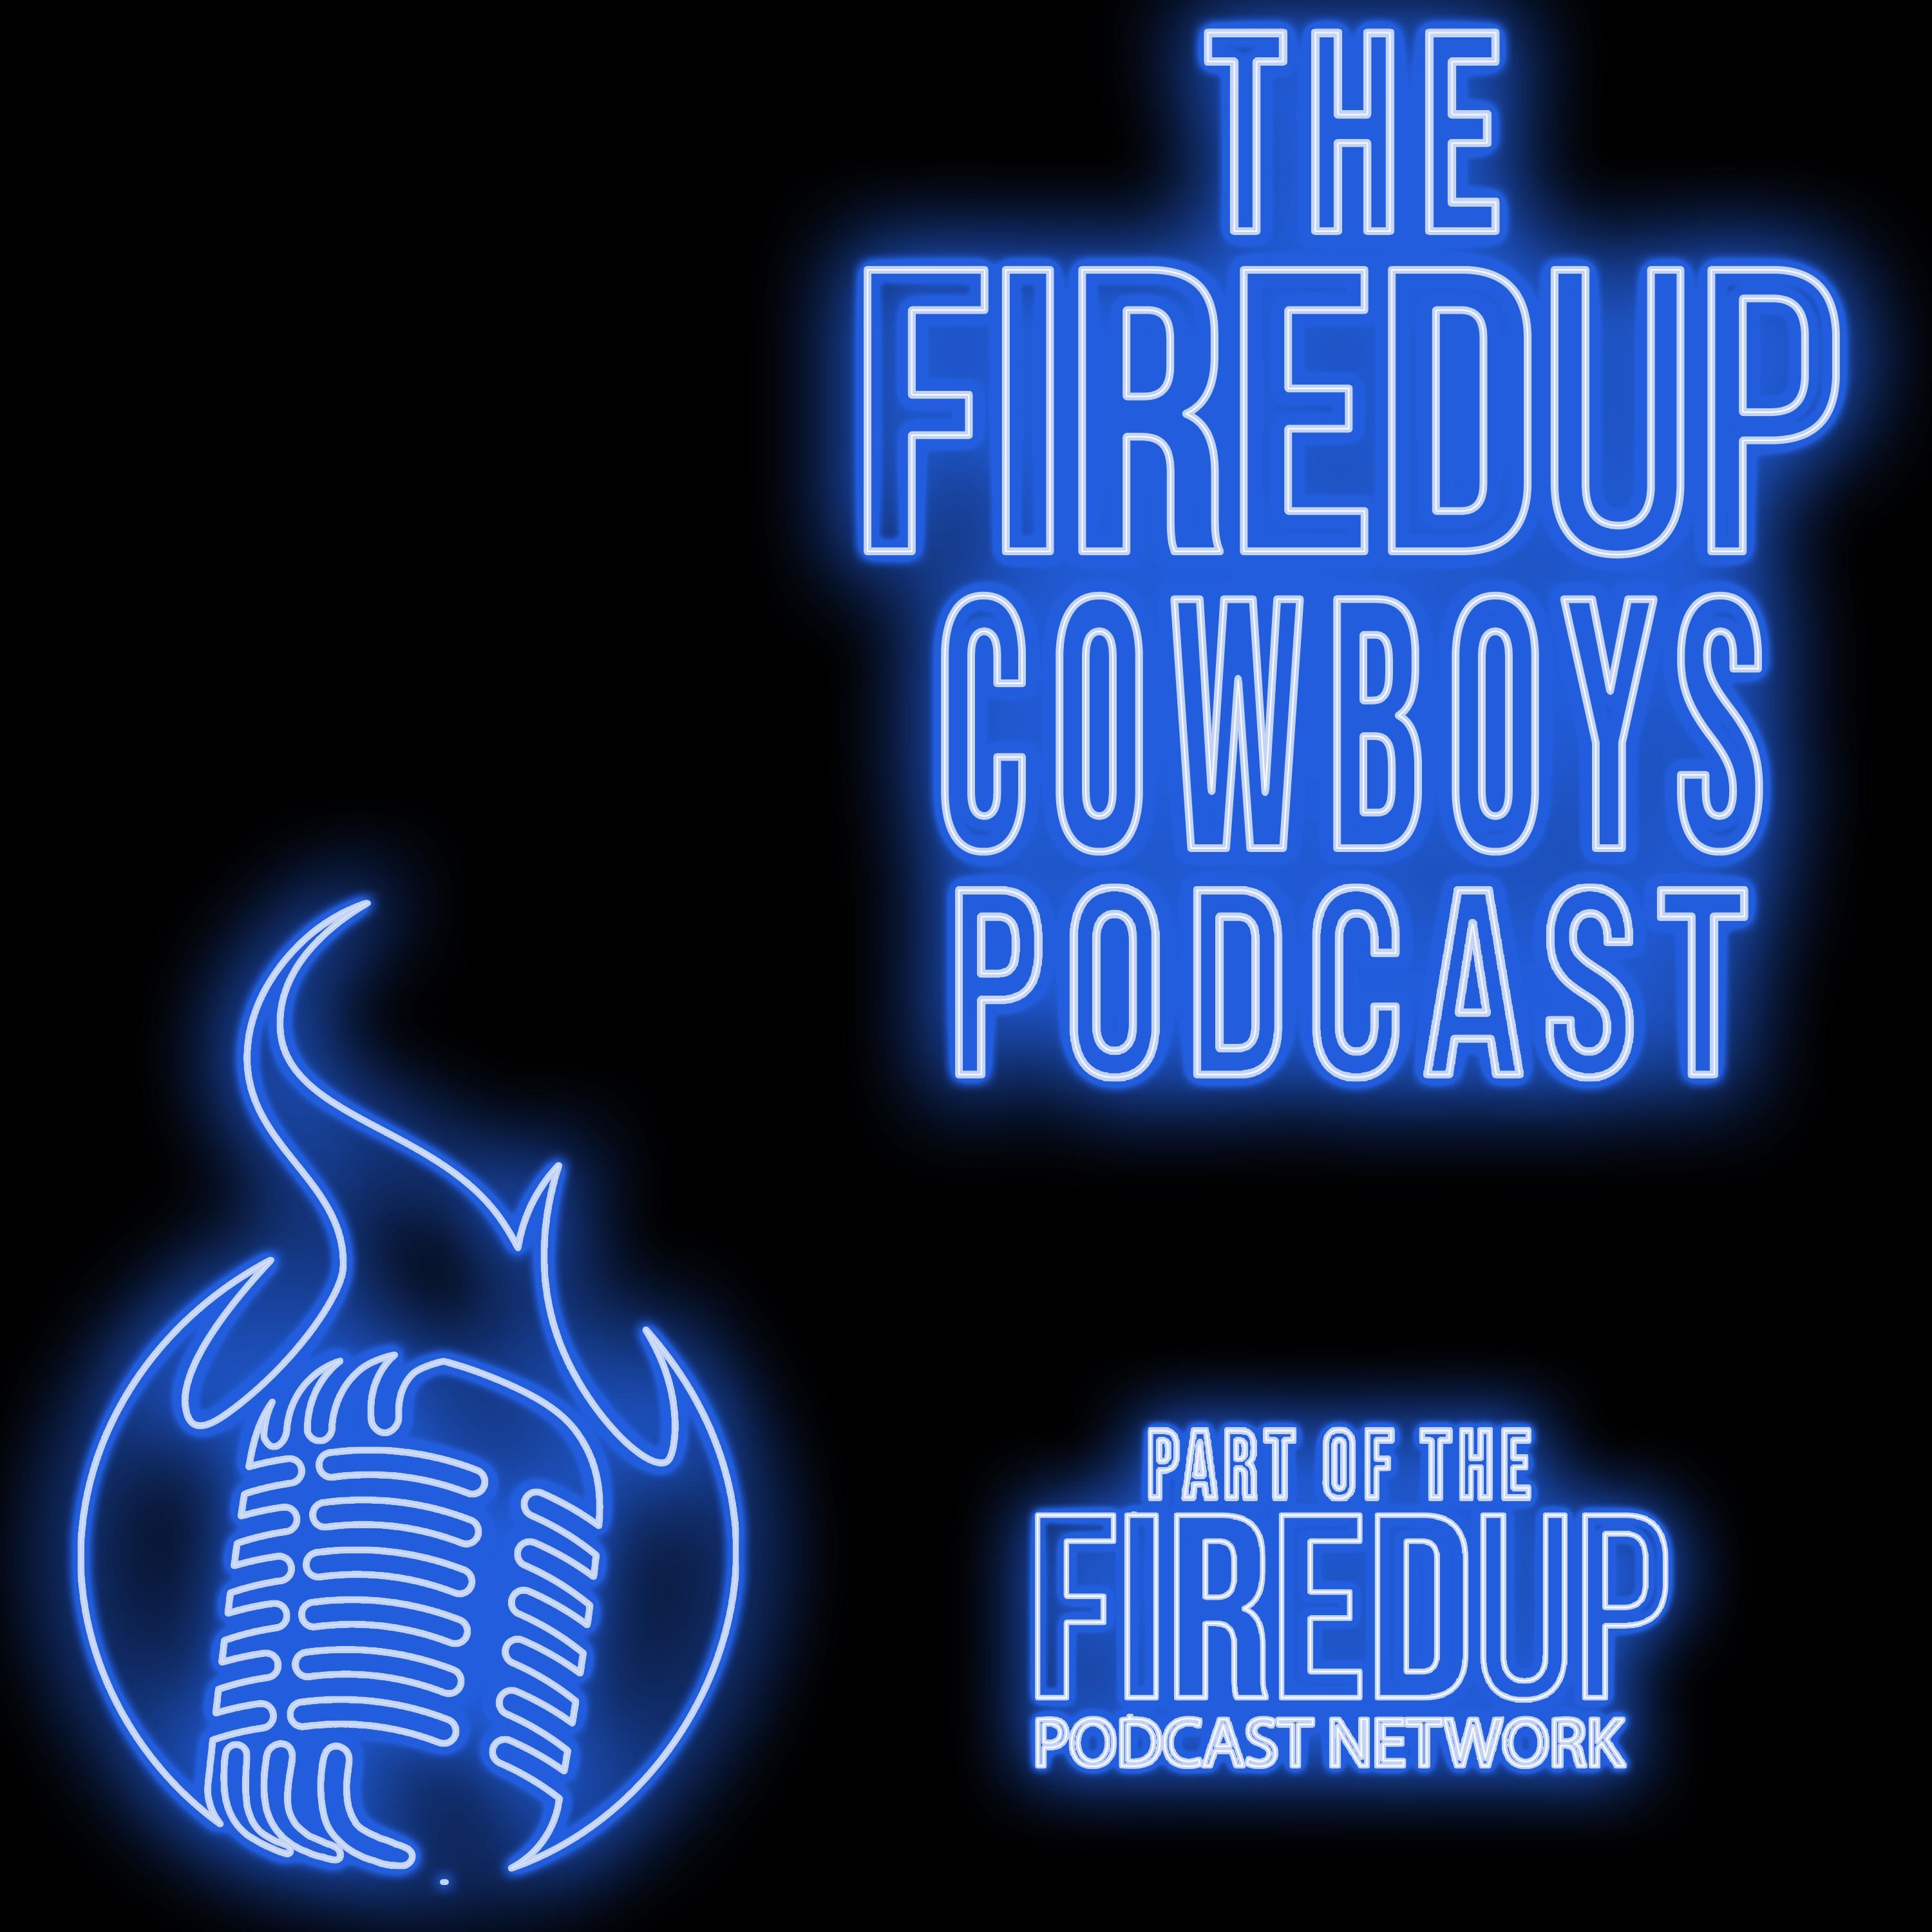 The Fired Up Cowboys Podcast